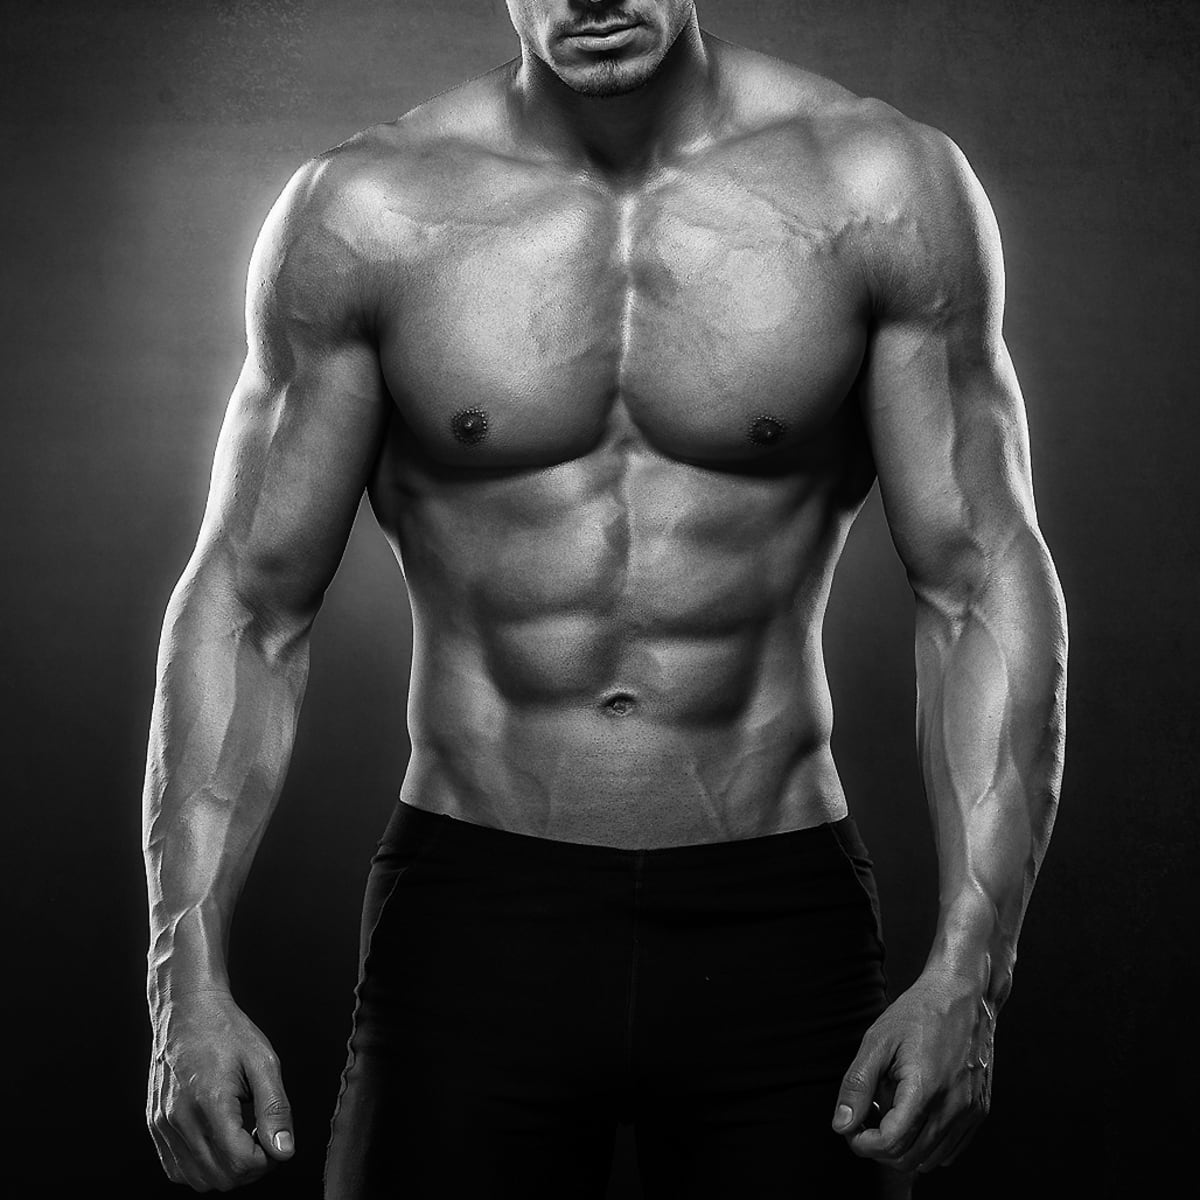 5 ways to look bigger than you really are - Men's Journal